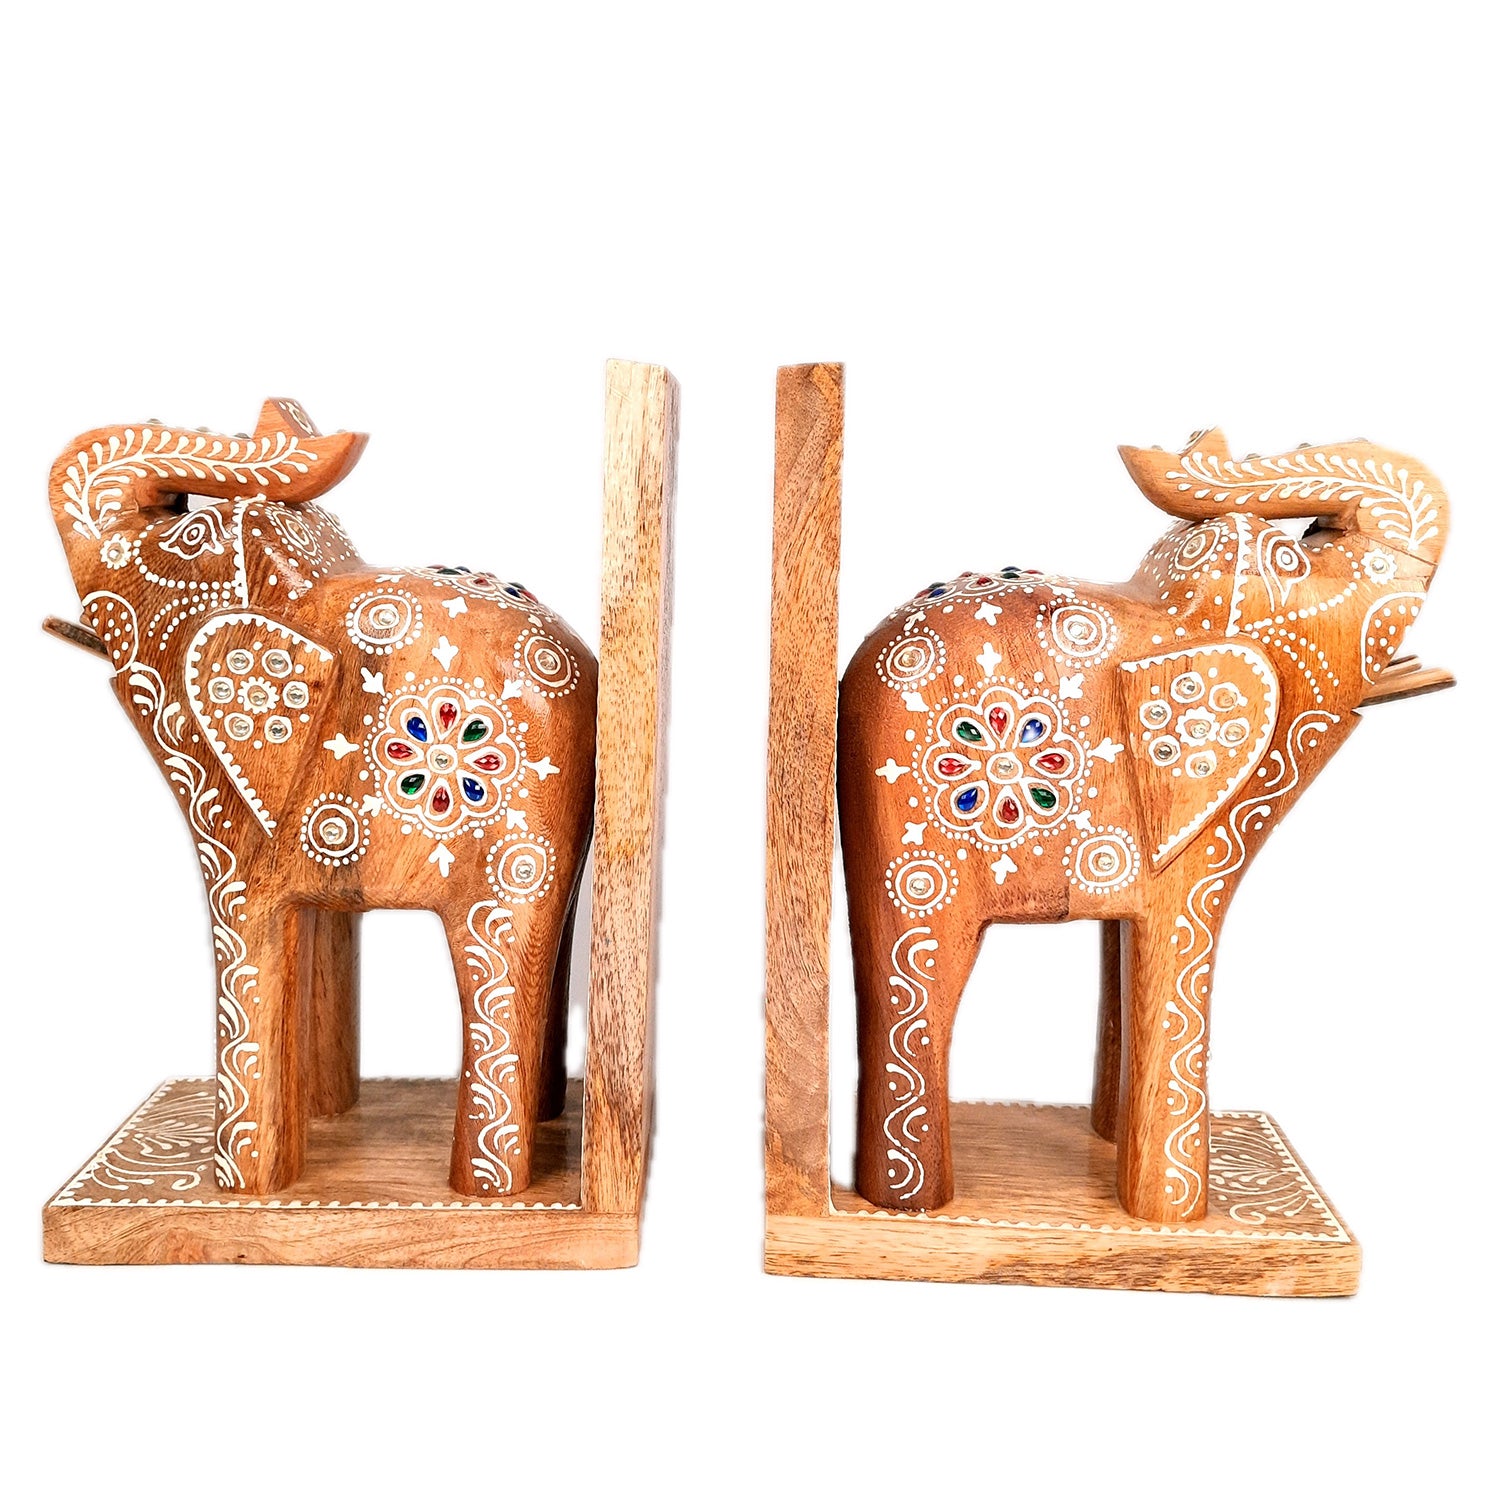 Book Ends - Wooden Elephant Design | Book Holders Stand | Bookend Desk Organizer - For Home, Table, Desk, Office, Study Kids Room & Gifts - 14 Inch - apkamart